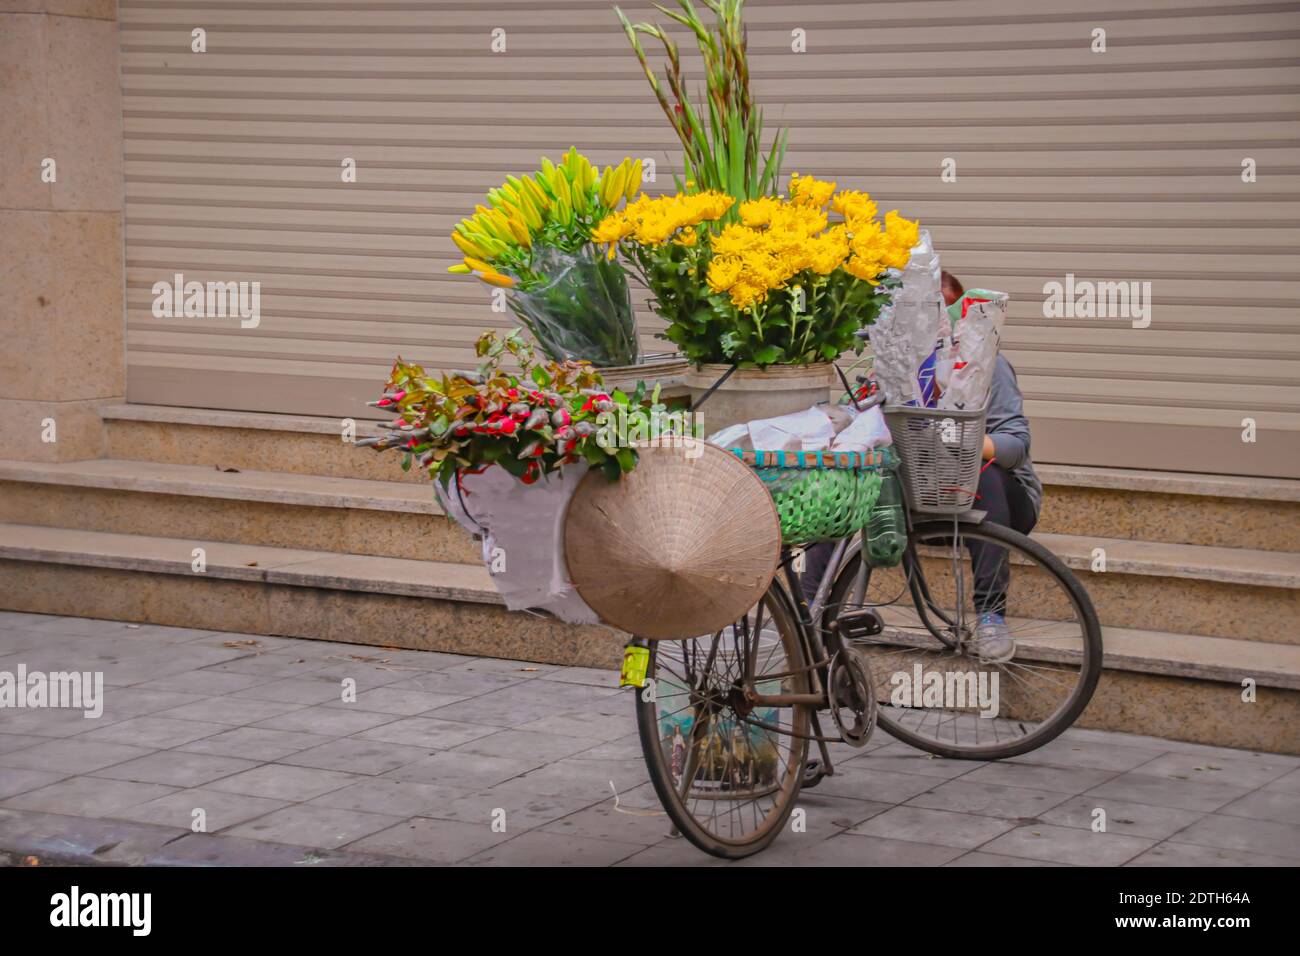 A street vendor selling flowers on a bicycle in Hanoi, Vietnam Stock Photo